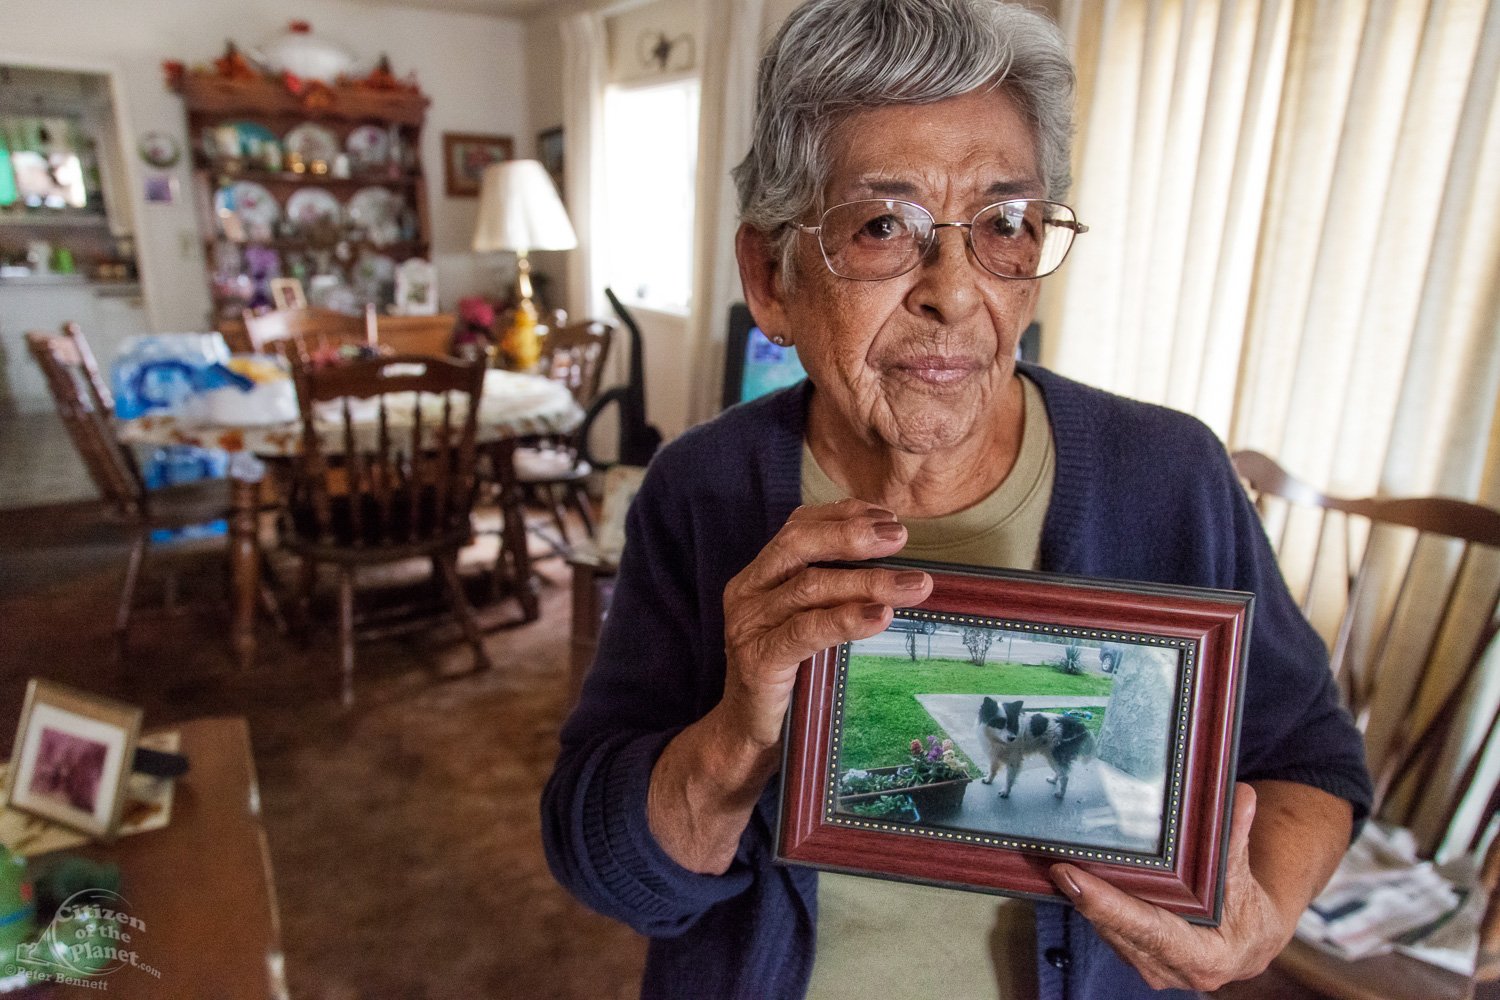  Vicki Yorba, 95, shows a photo of her front lawn before the severe drought that has affected her community. Vicki’s well ran dry and now depends on bottled water being delivered by volunteers. 